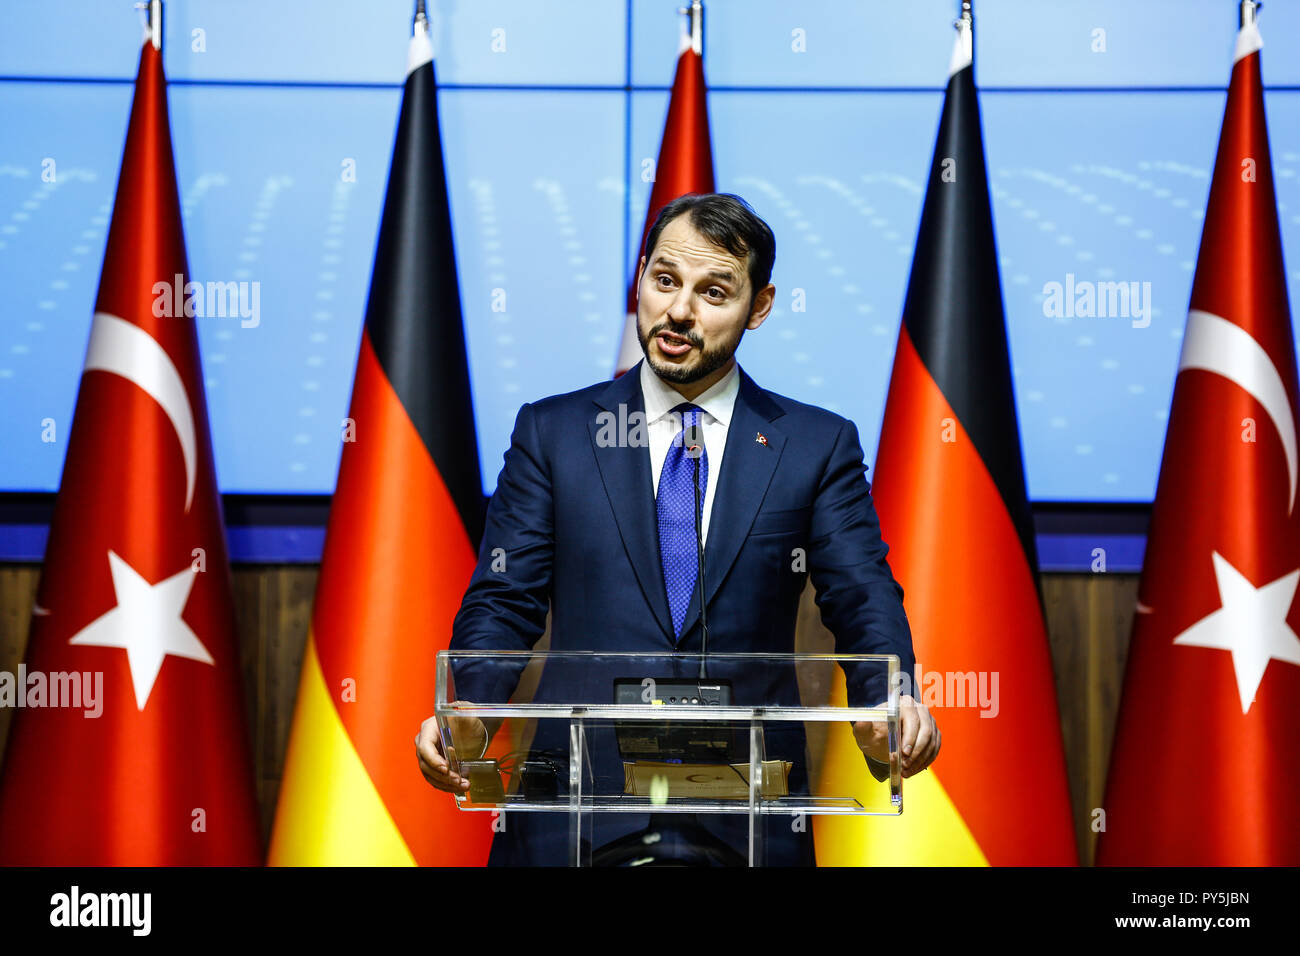 Ankara, Turkey. 25th Oct, 2018. Turkish Minister of Finance and Treasury Berat Albayrak speaks during a press conference with German Minister for Economic Affairs and Energy Peter Altmaier (not pictured) after their meeting. Credit: Ahmed Deeb/dpa/Alamy Live News Stock Photo